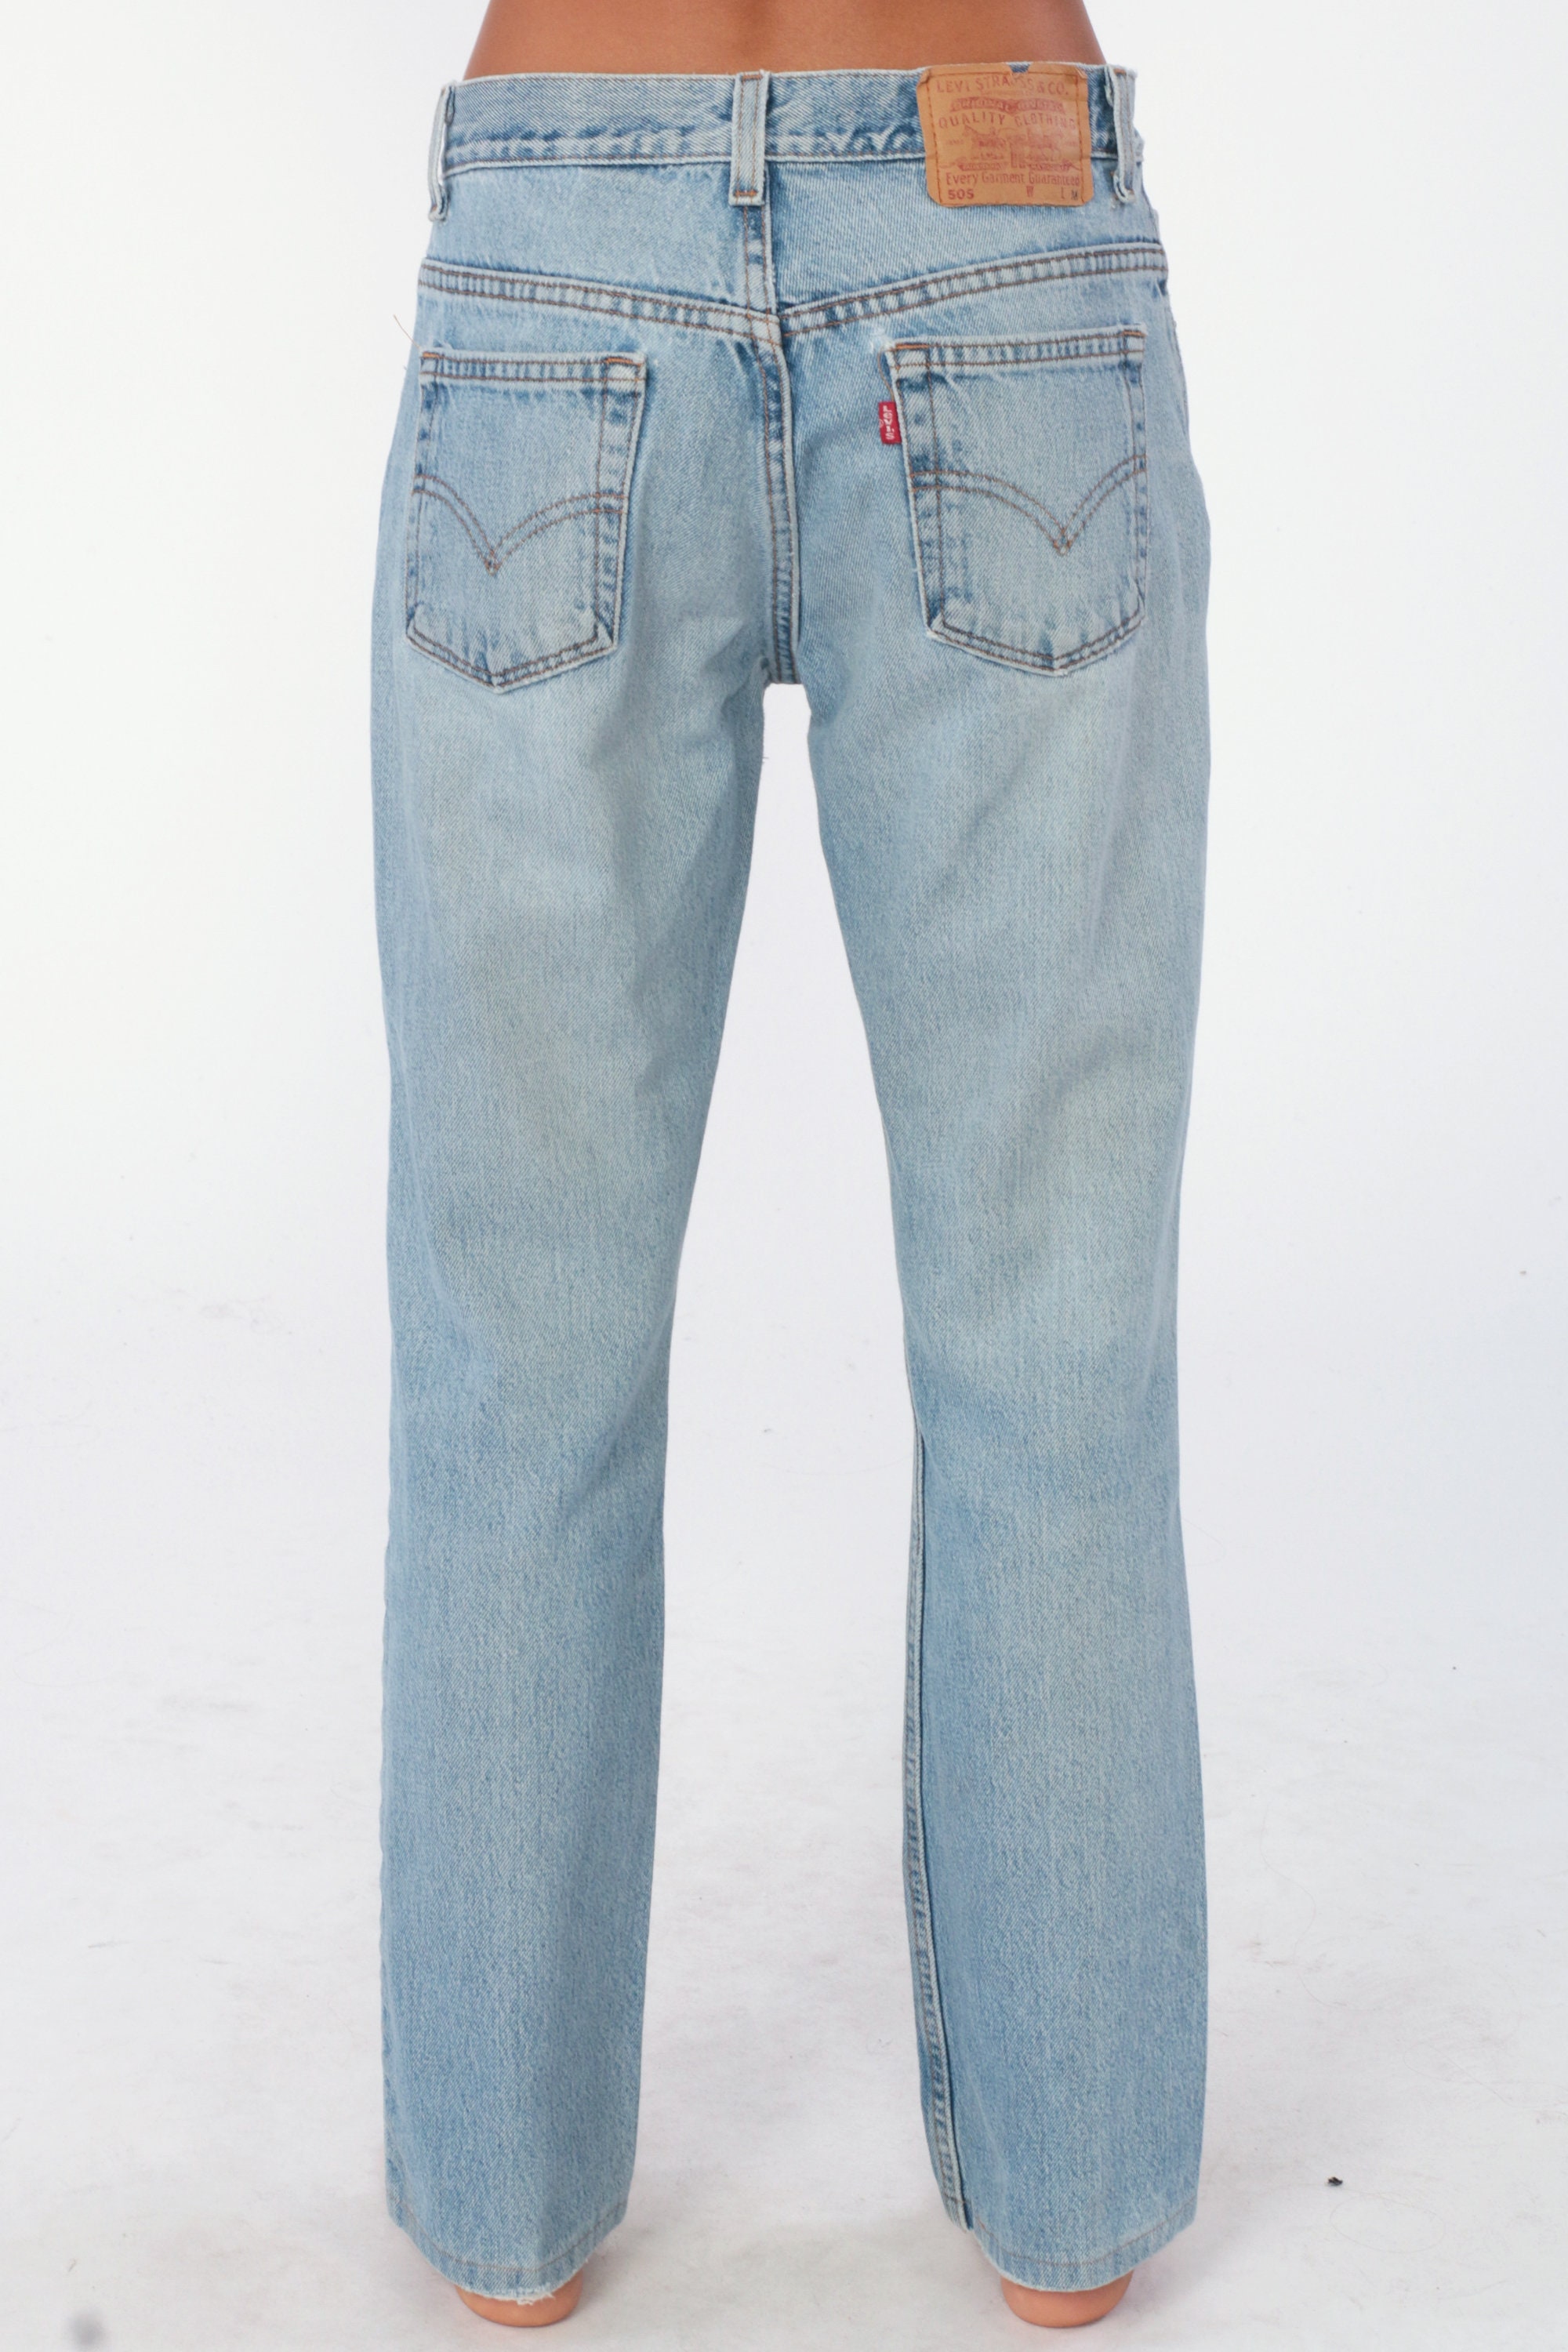 Levis Jeans 31 -- 505 Baggy Jeans LEVI STRAUSS Grunge 80s Mom Jeans ...